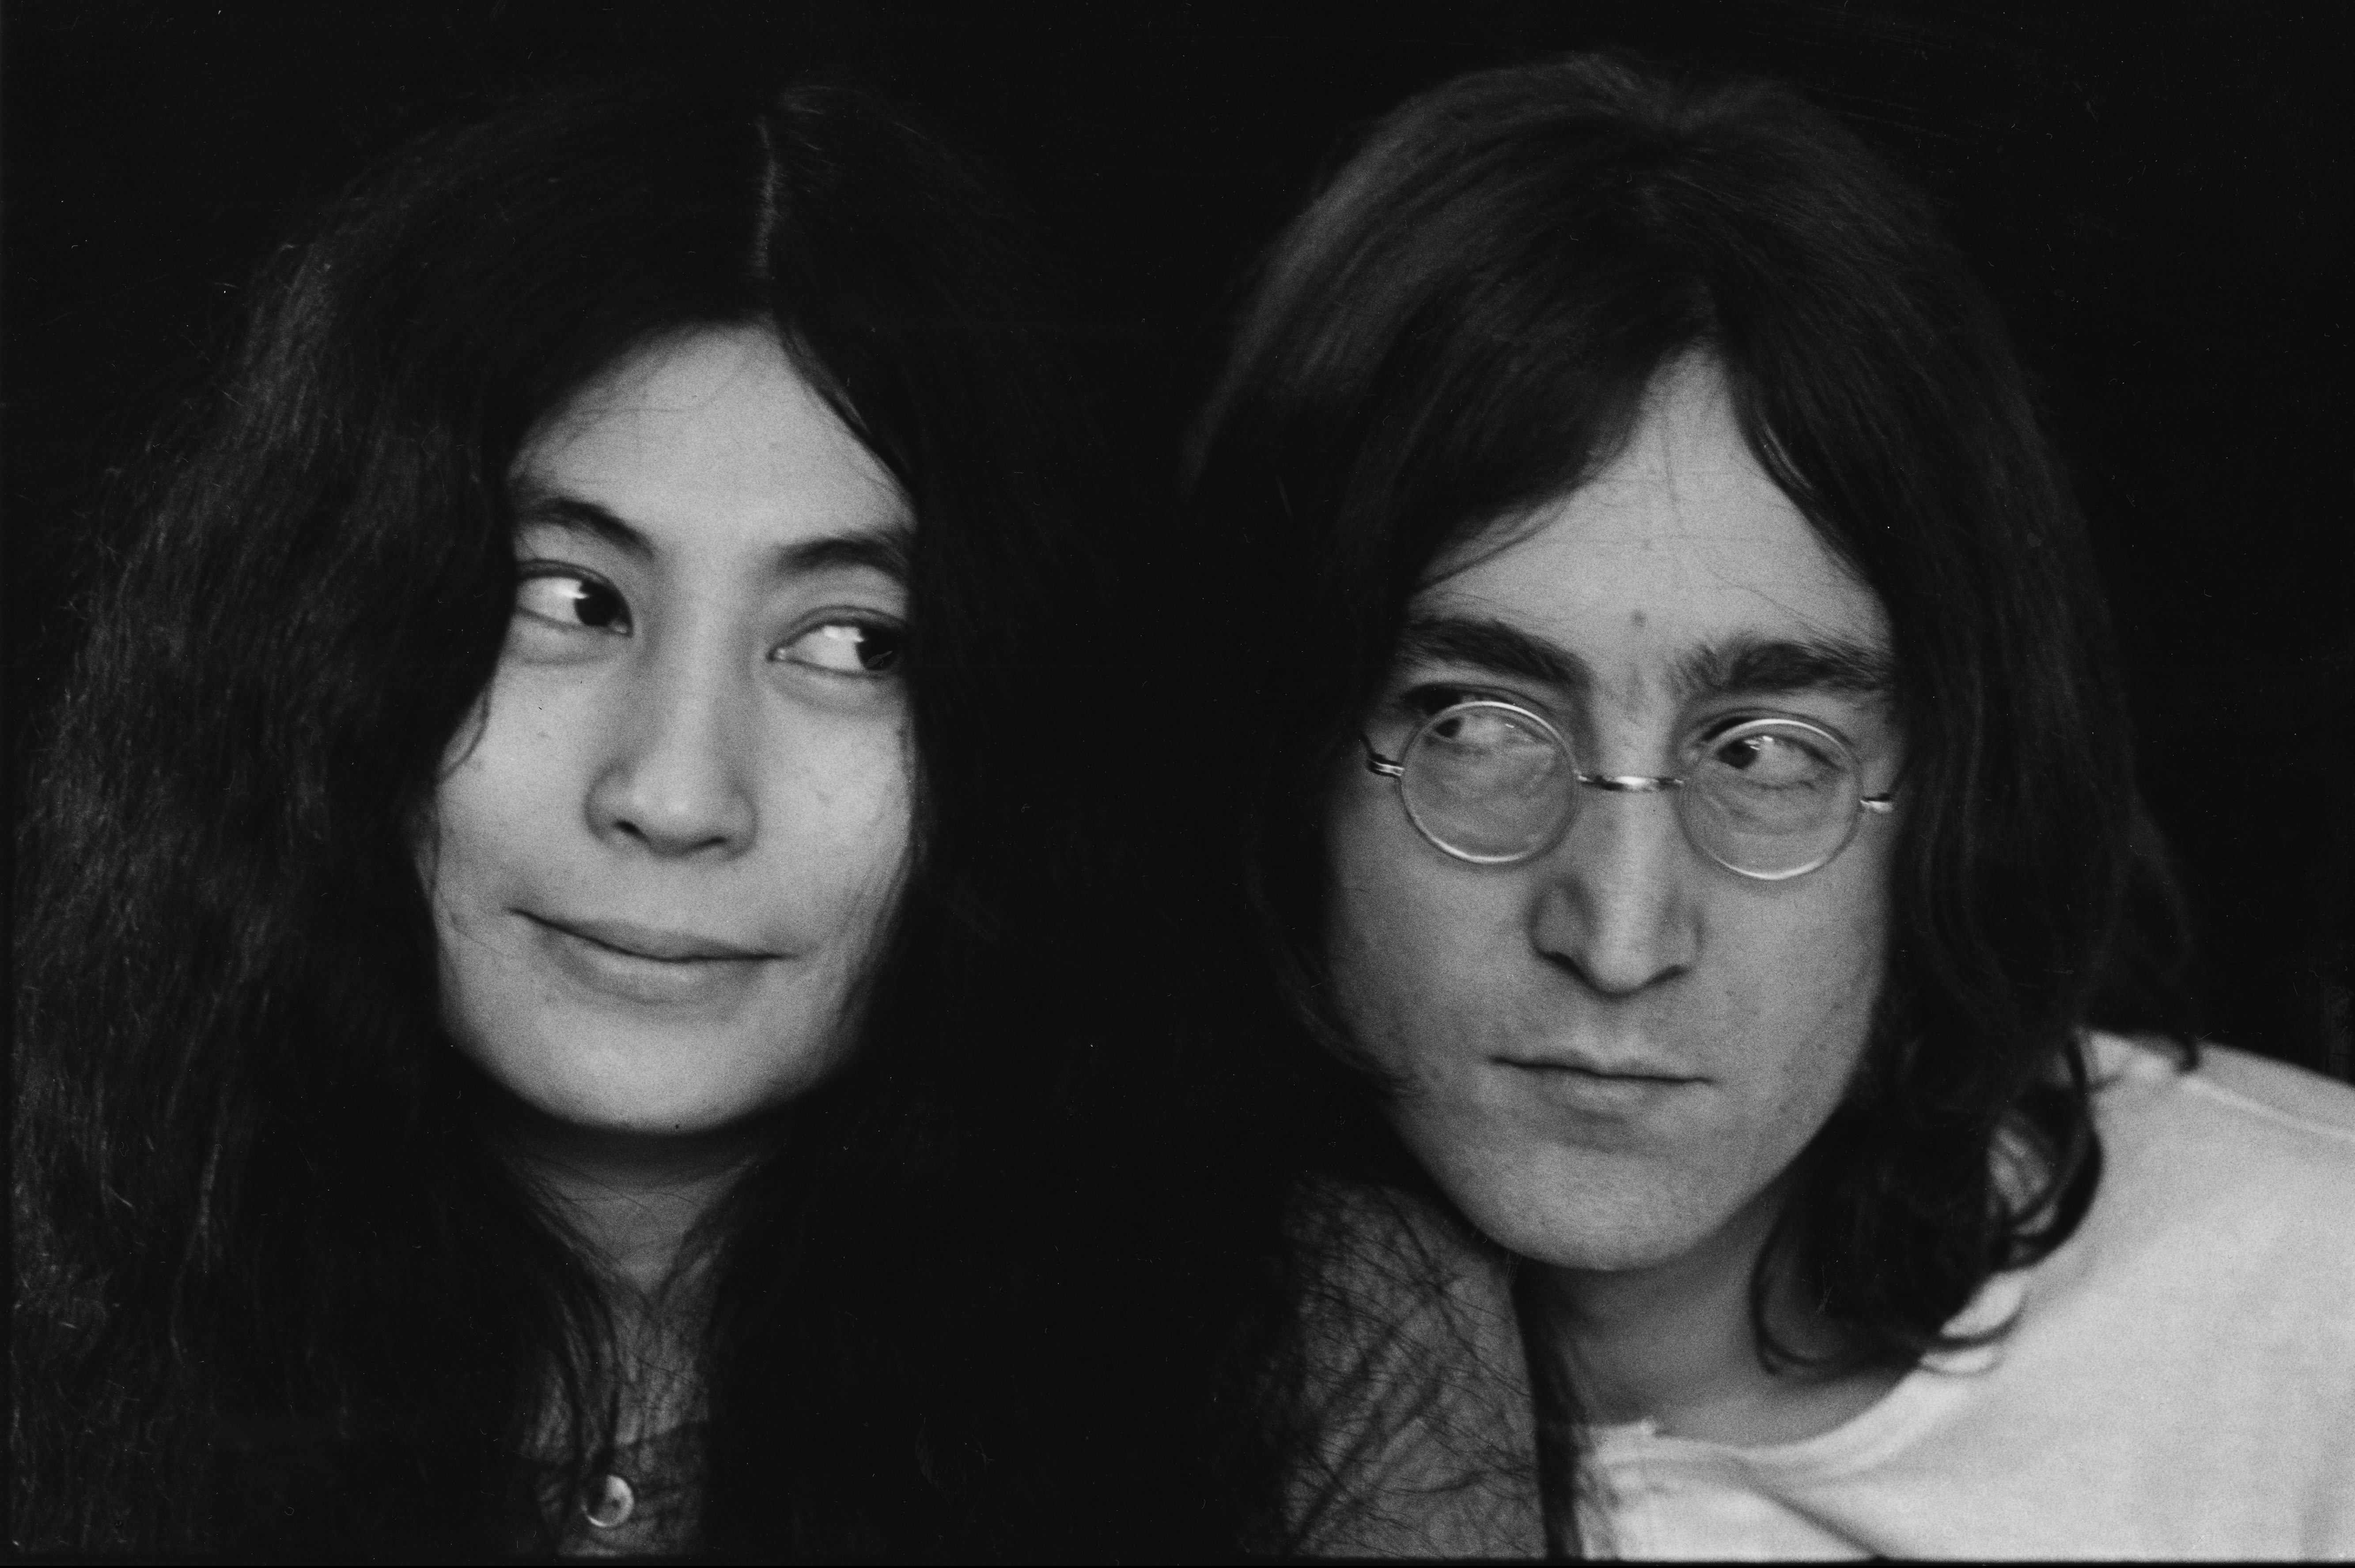 Remembering John Lennon’s Contentious Interview About World Peace